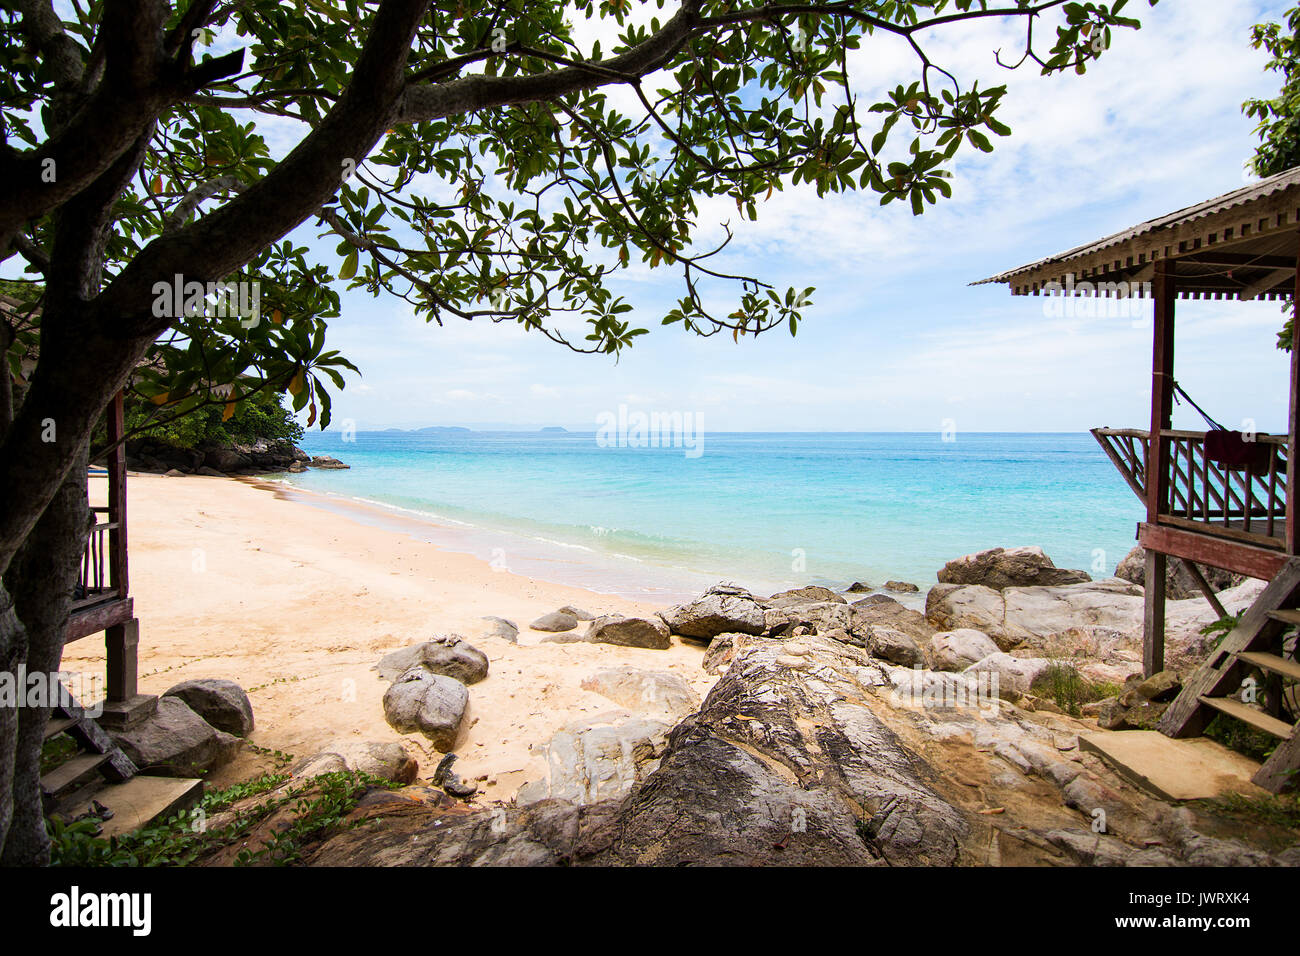 Perhentian island, Perfect white sand beach to turquoise sea with wooden beach huts on rocks. Stock Photo